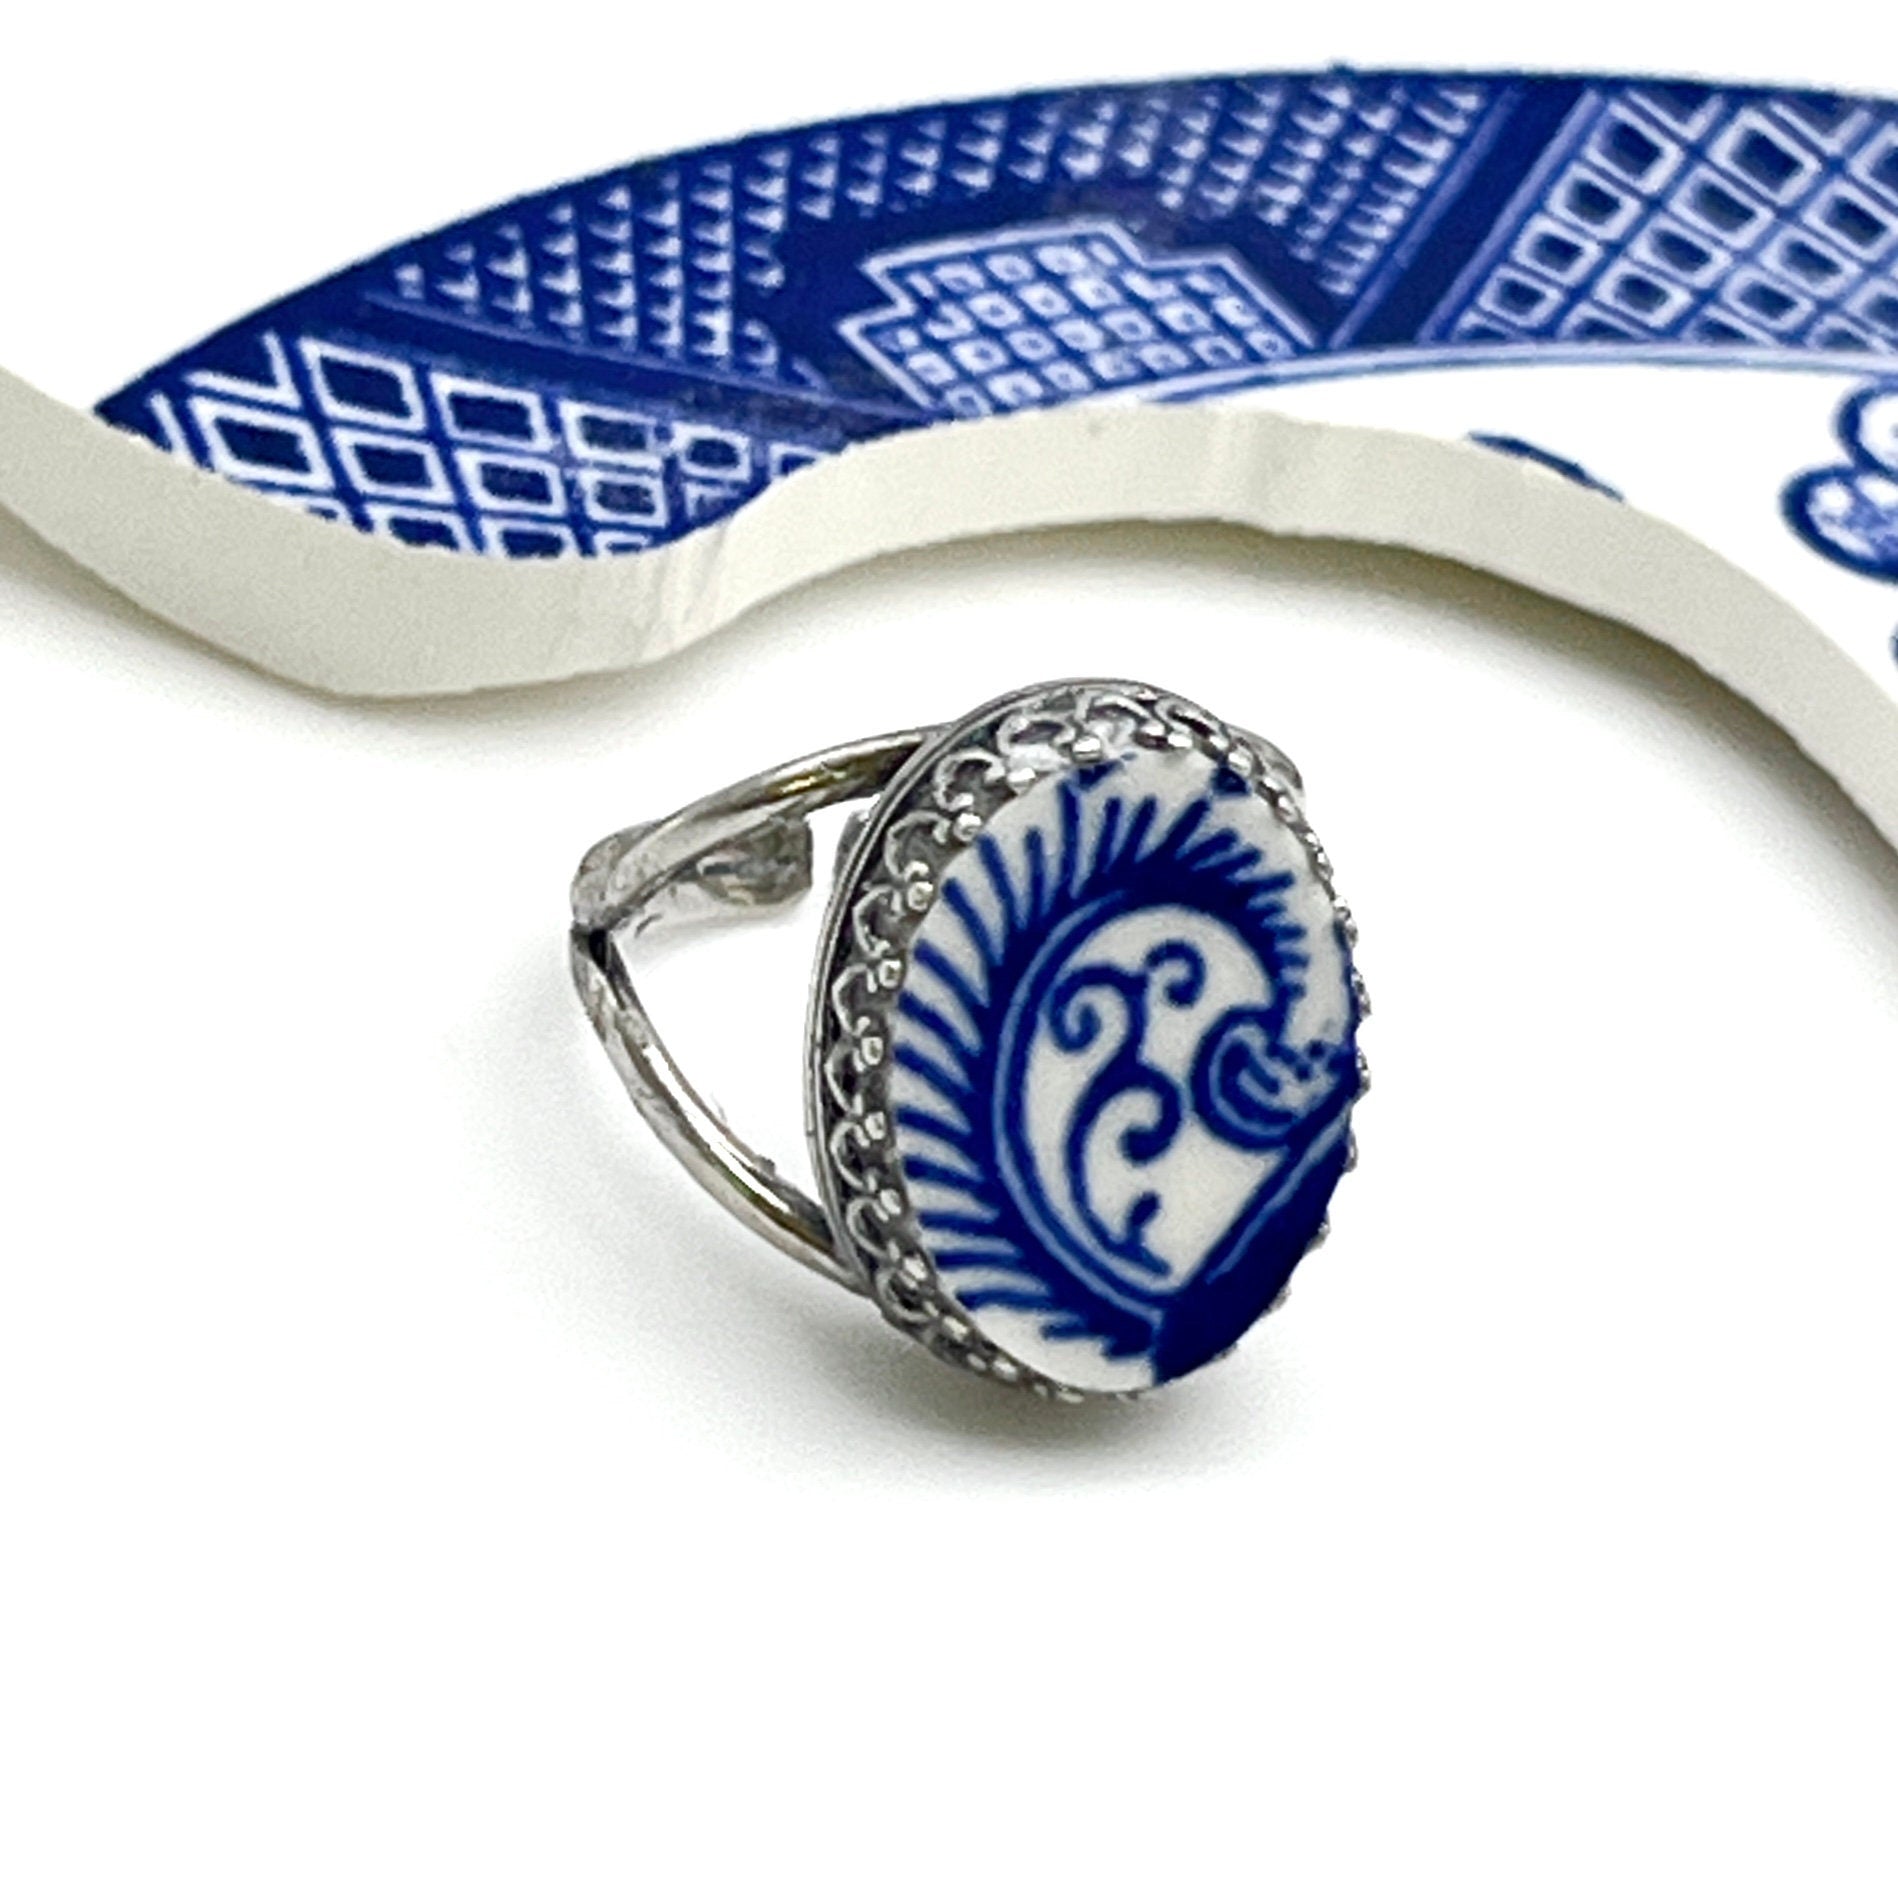 Blue Willow Broken China Jewelry Ring, Adjustable Sterling Silver Ring, Blue and White Jewelry, Fern Swirl Jewelry, Unique Gifts for Women